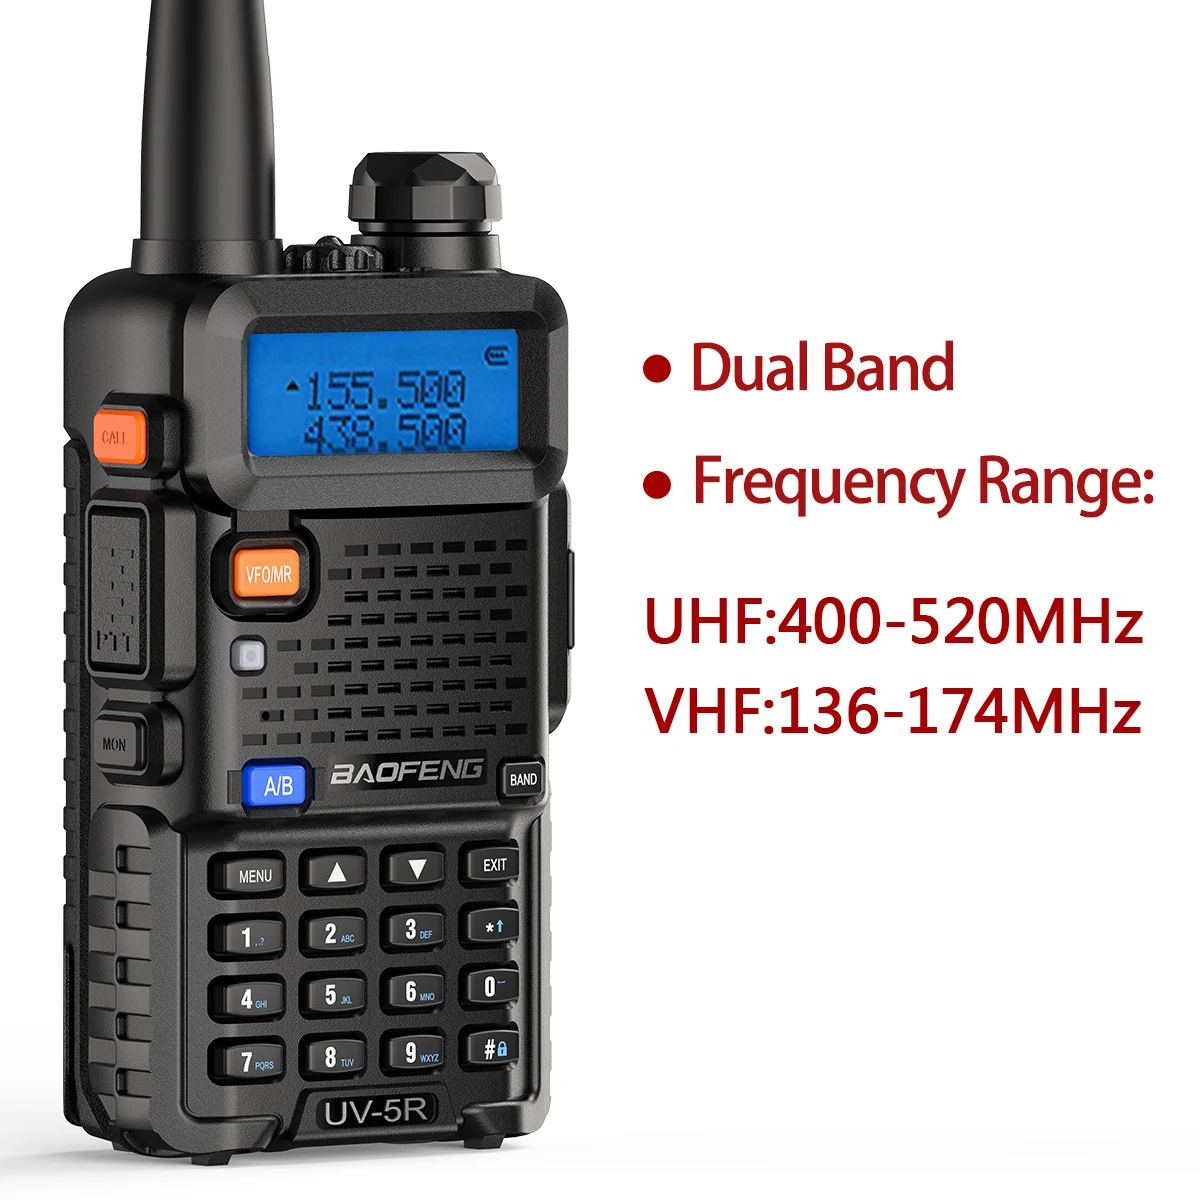 BAOFENG UV-5R 8W Handheld Ham Radio with 3800mAh Rechargeable Battery, Dual-Band 2-Way Radio Complete Set with Earpiece and Programming Cable (1 Pack) - 2